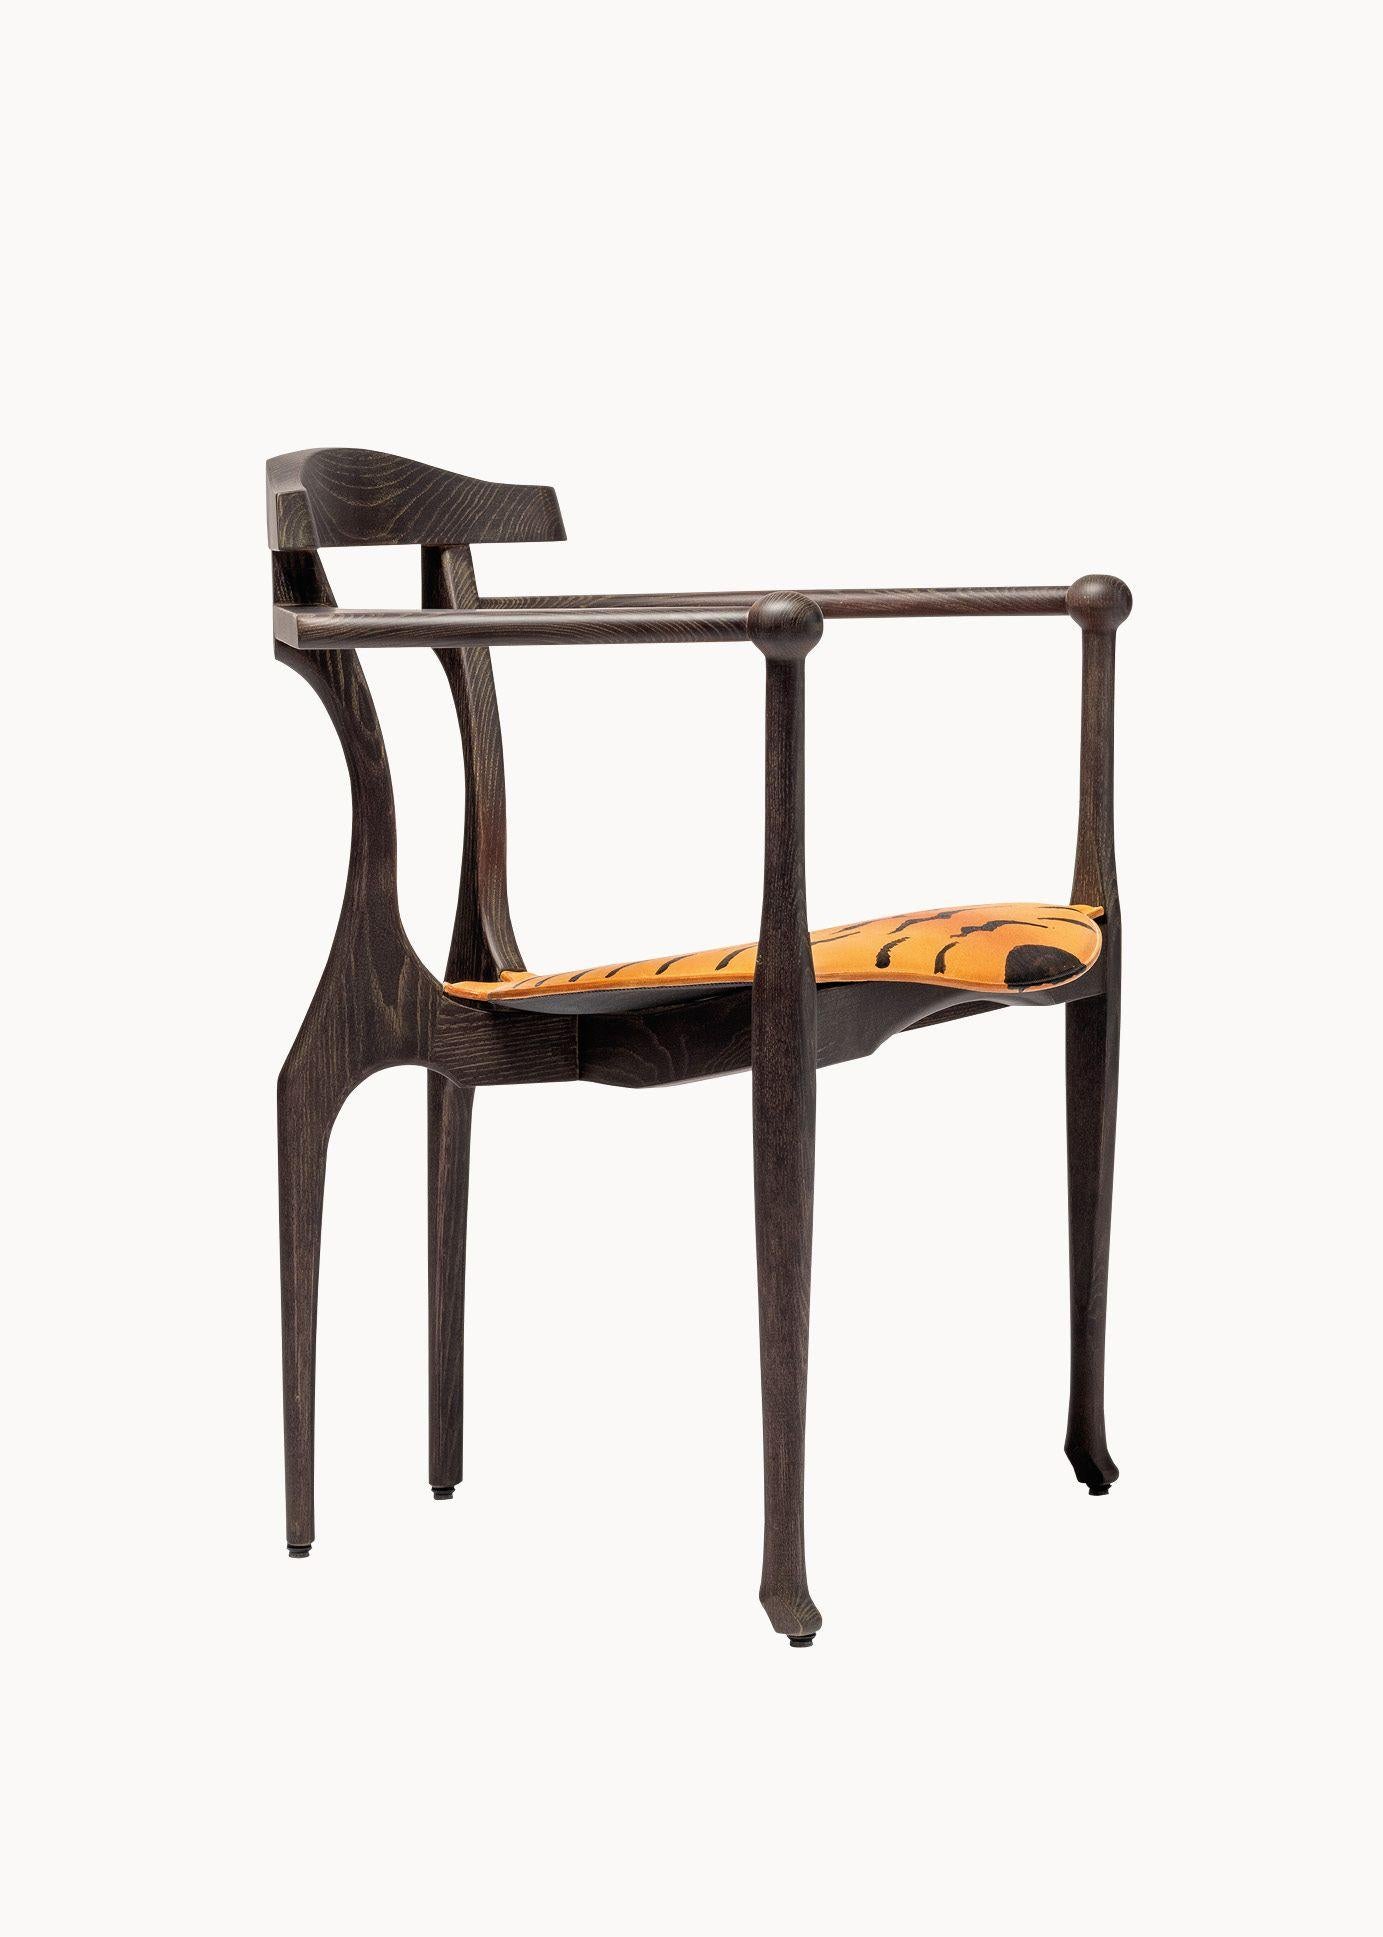 Tiger Art Gaulino Limited Edition Armchair by Oscar Tusquets

Chair in ash wood with dark stained and varnished patina and a natural leather seat. Seat limited to 50 unique pieces, hand-painted with tiger fur patterns by Oscar Tusquets.

A limited